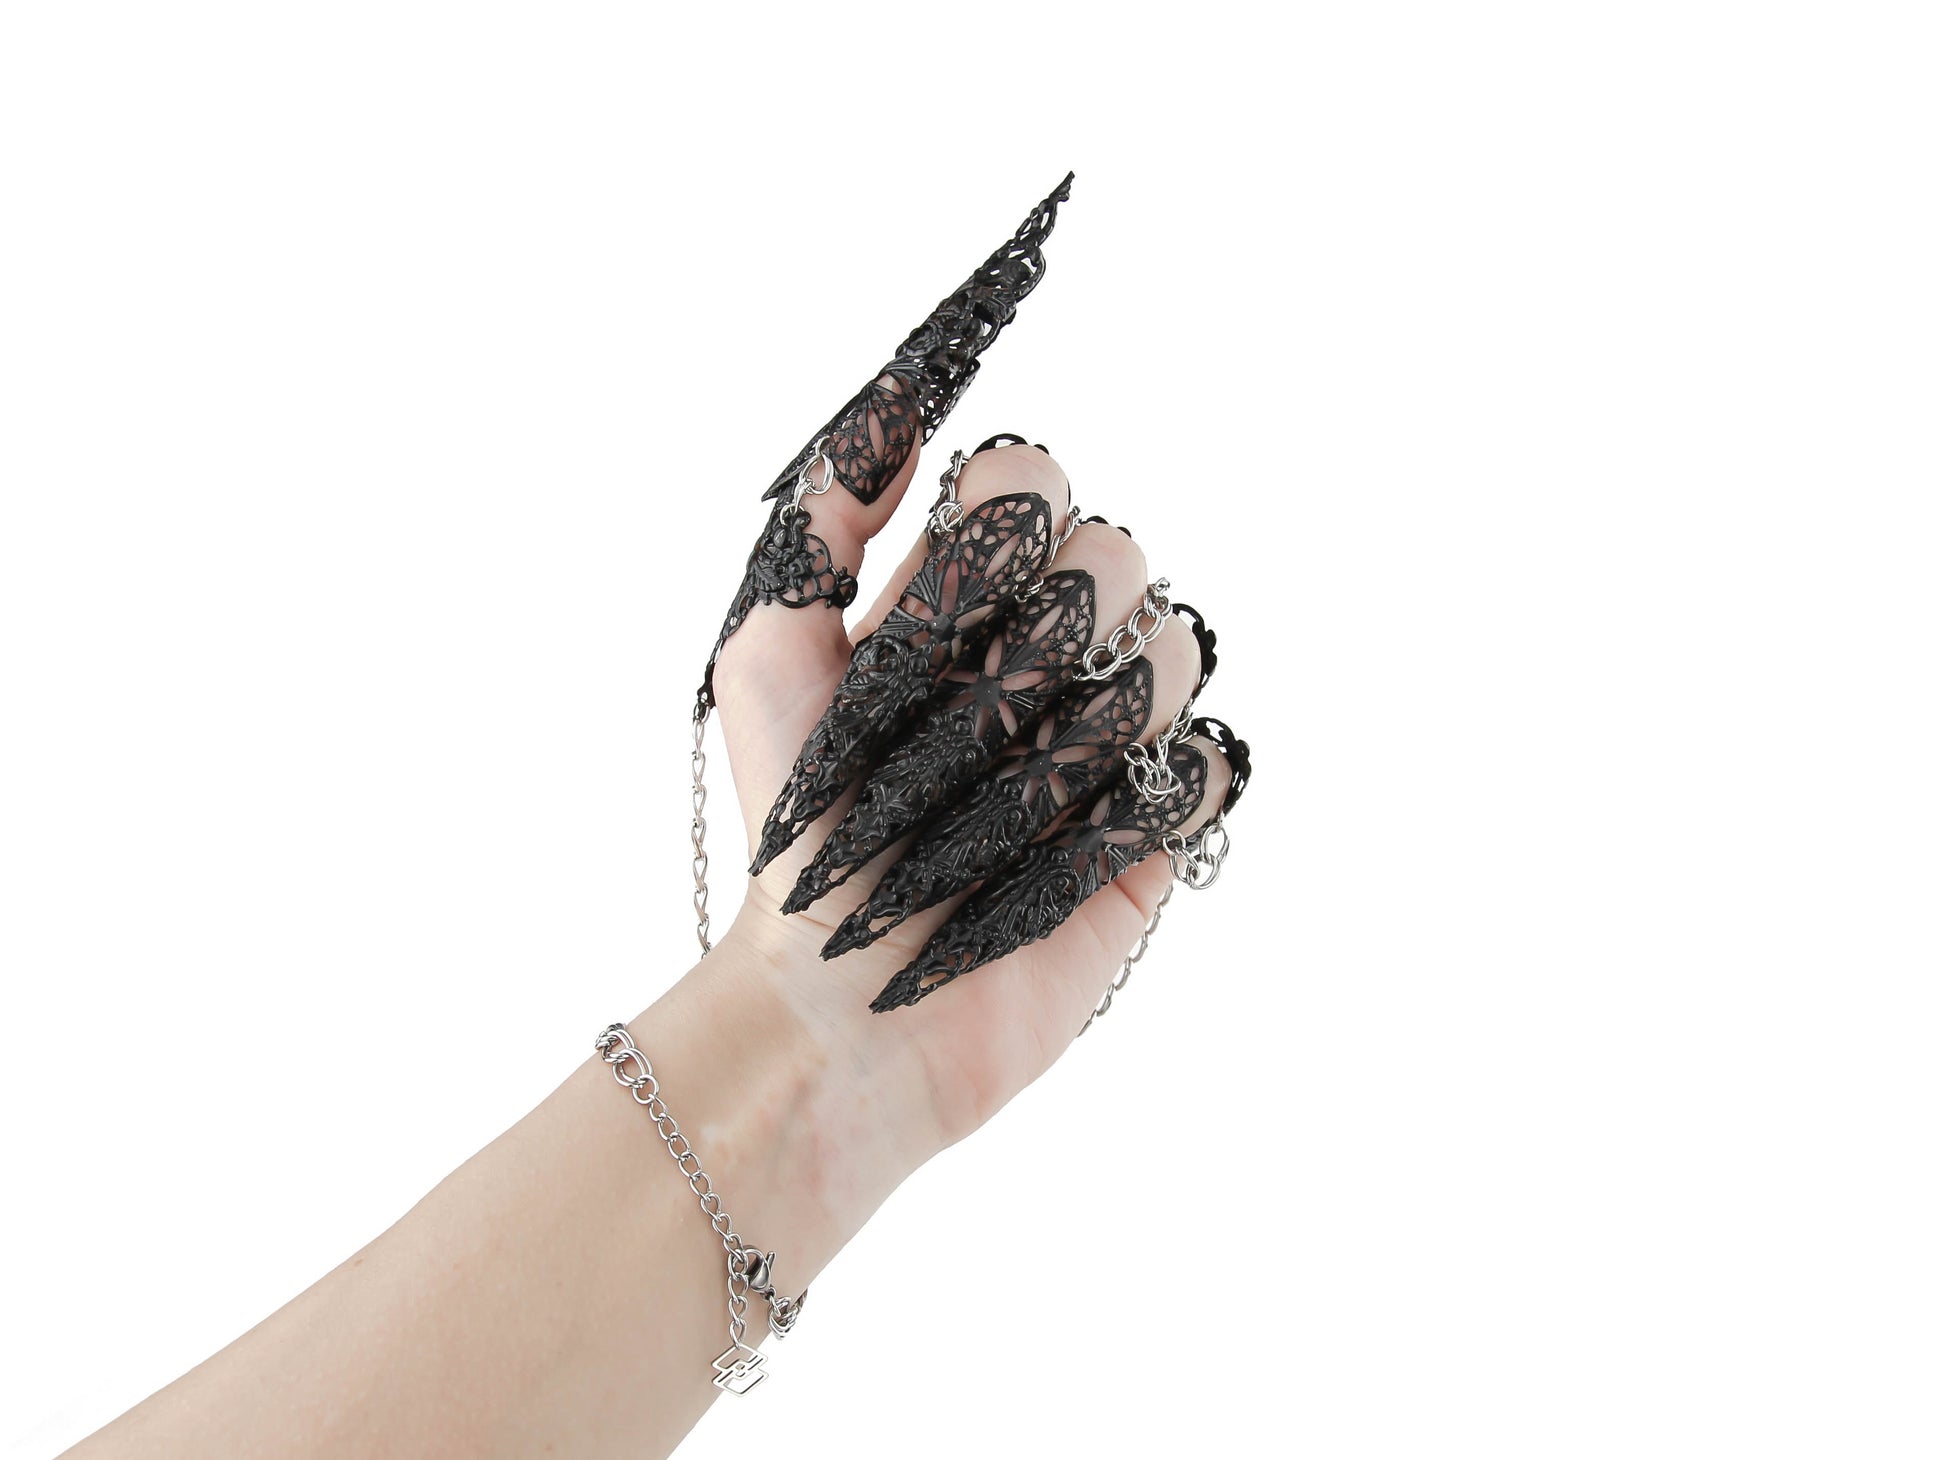 Delve into the realm of Myril Jewels with these exquisite full-hand armored claw rings, intricately designed for the dark avant-garde enthusiast. Perfect for a gothic, alternative look, these rings are ideal for Halloween, embodying Neo Gothic sophistication and punk attitude. They're a dramatic choice for Gothic Lolita, Gothic-chic, whimsigoth, or witchcore aesthetics, and make a powerful statement for drag queens and performers seeking a touch of everyday minimal goth.